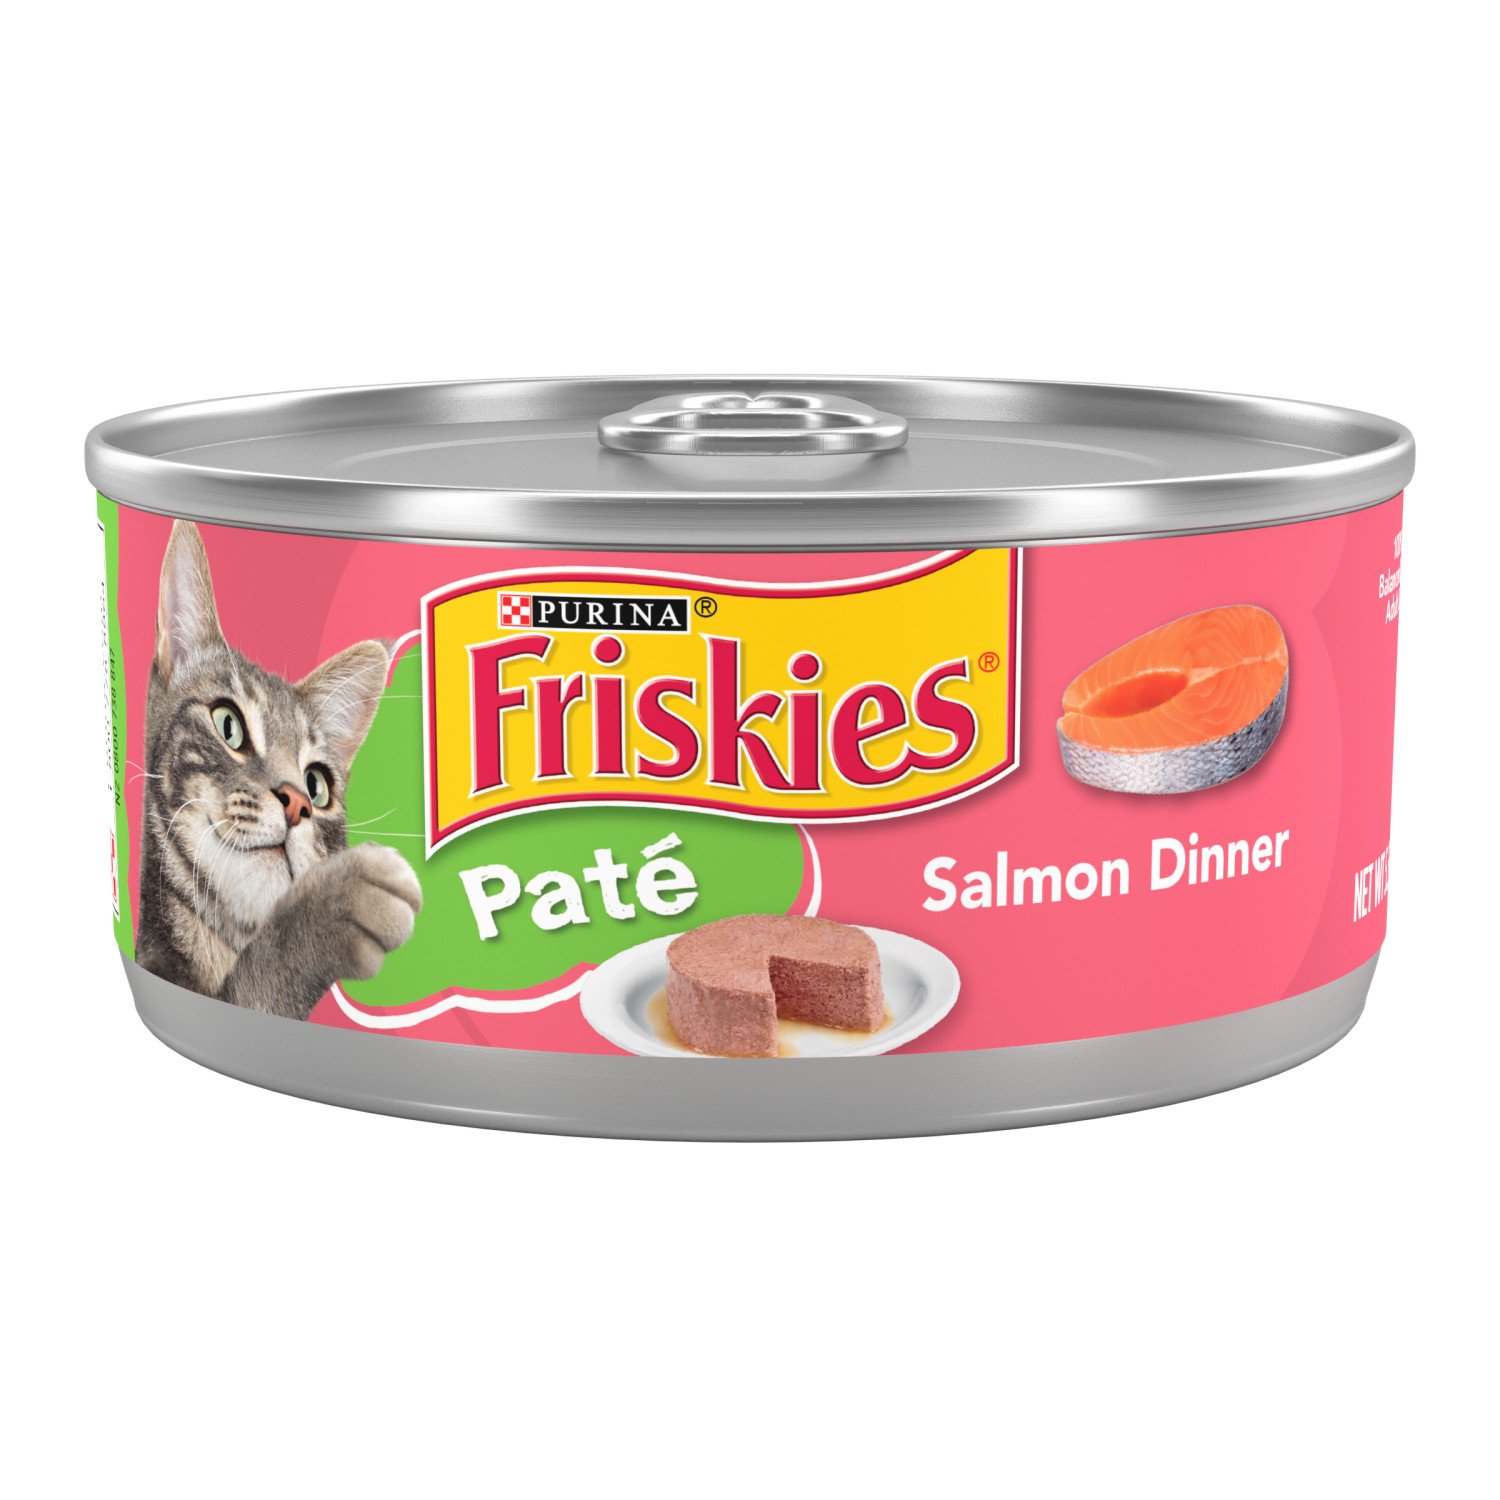 Purina Friskies Pate Salmon Dinner Wet Cat Food Shop Cats at HEB